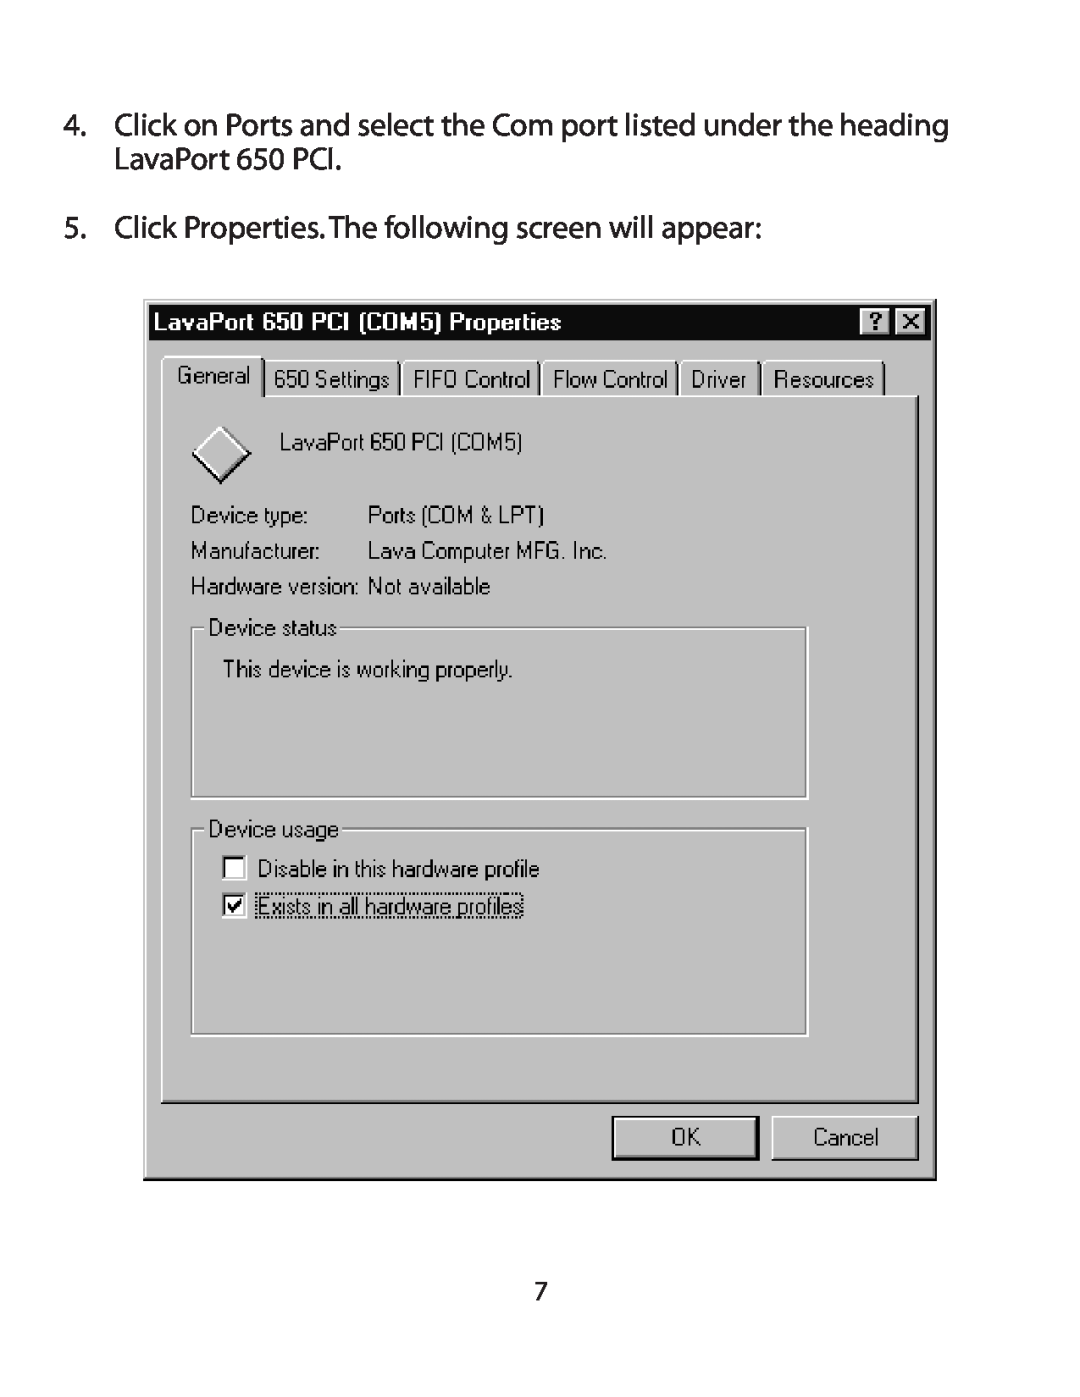 Lava Computer 650 installation manual Click Properties. The following screen will appear 